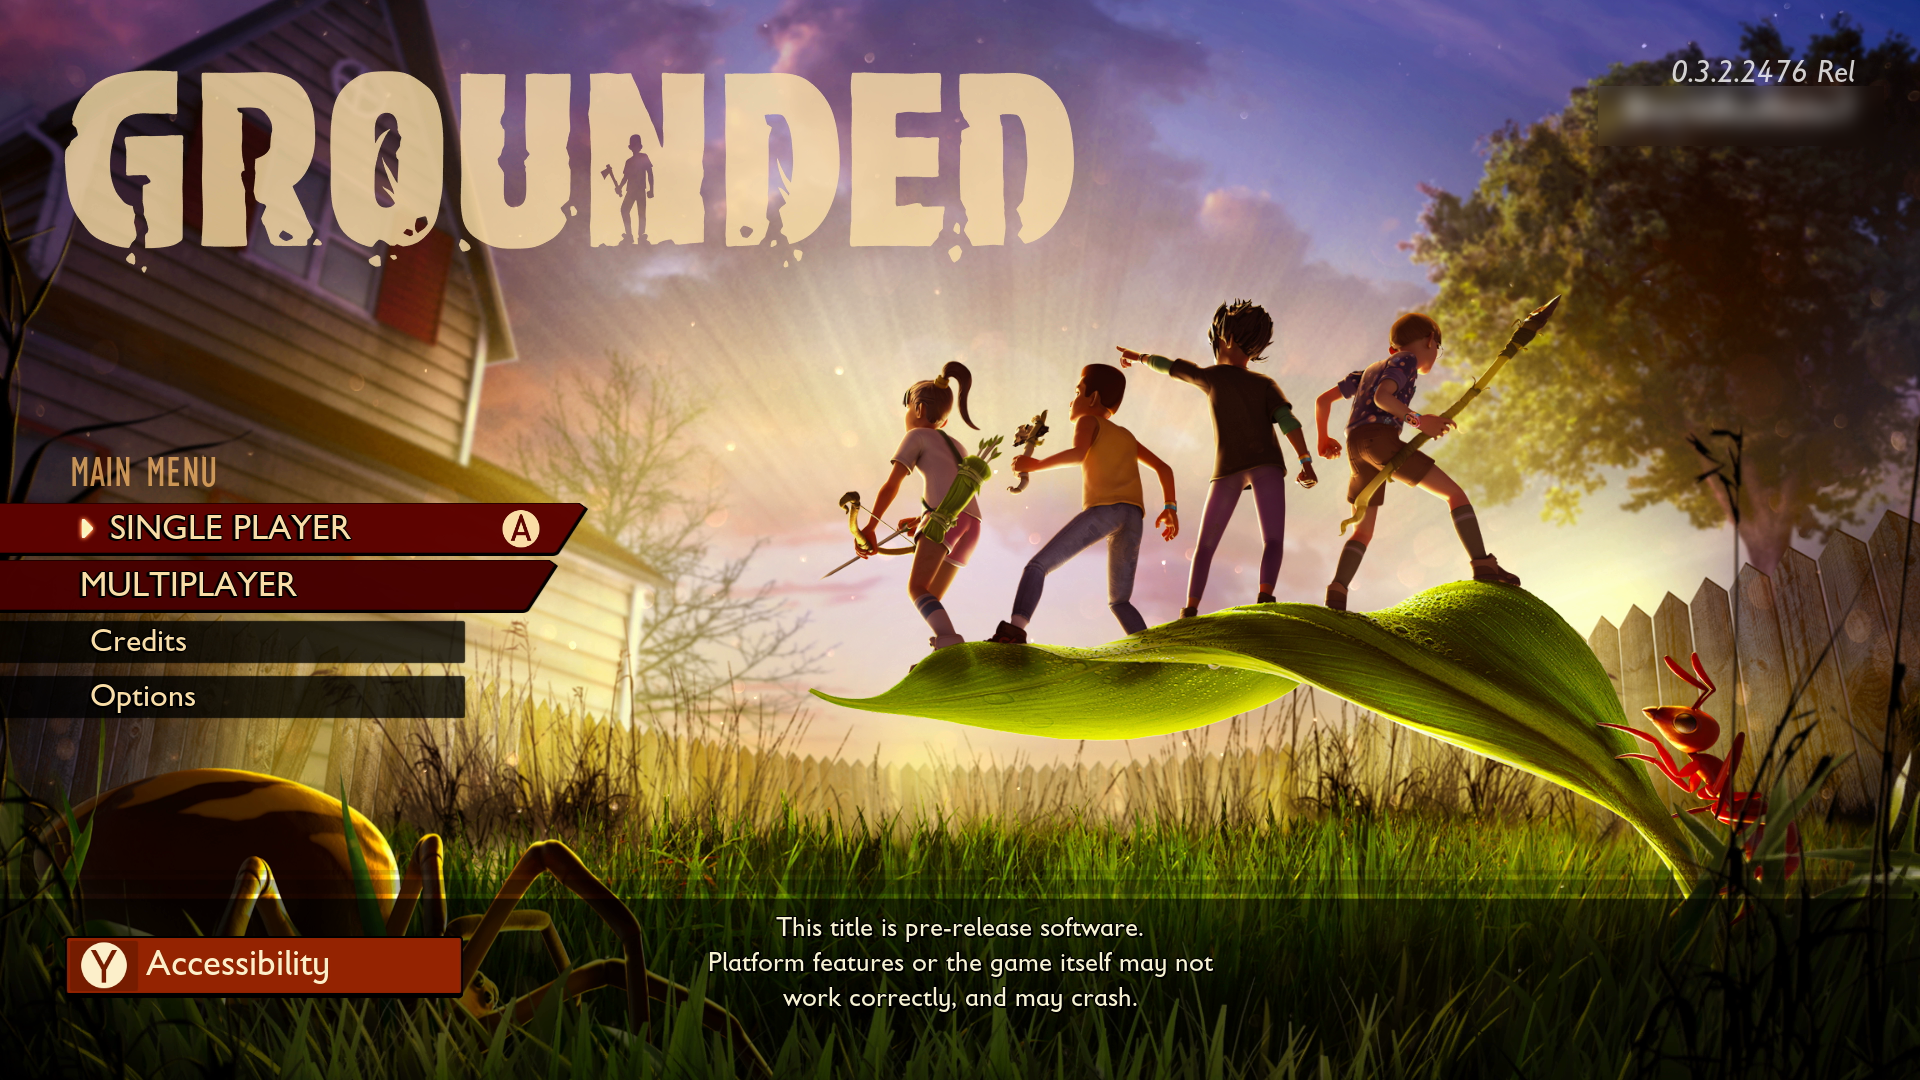 A screenshot of the main menu screen from Grounded. "A  - Accessibility" is displayed on the bottom-left corner of the screen.